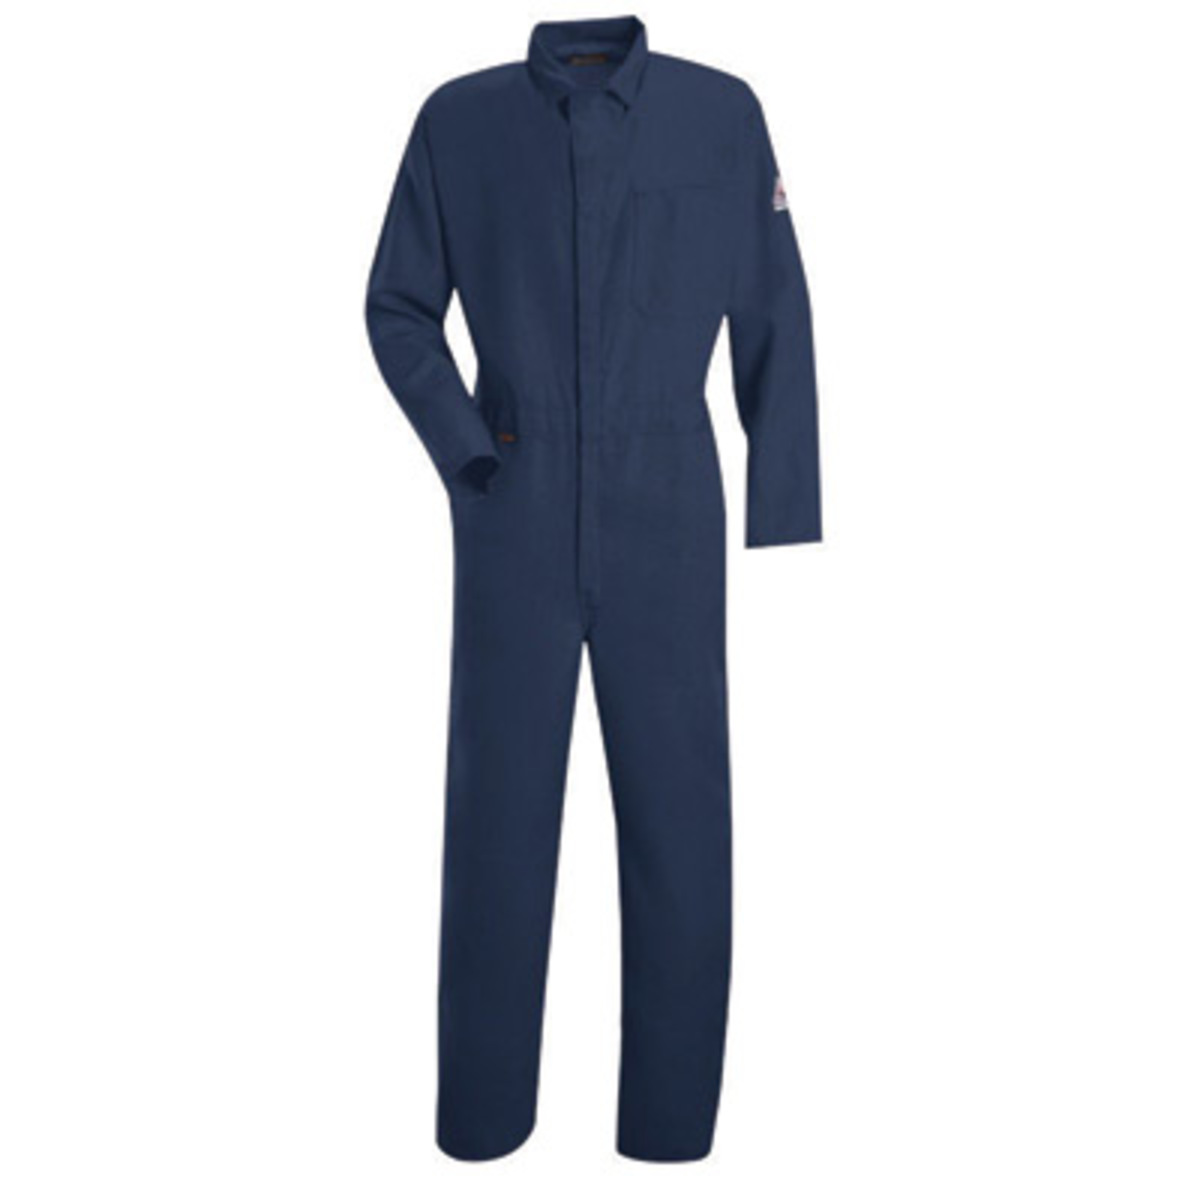 Stanco Safety Products™ 6X Navy Blue Nomex® IIIA Arc Rated Flame Resistant Coveralls With Concealed 2-Way Front Zipper Closure A